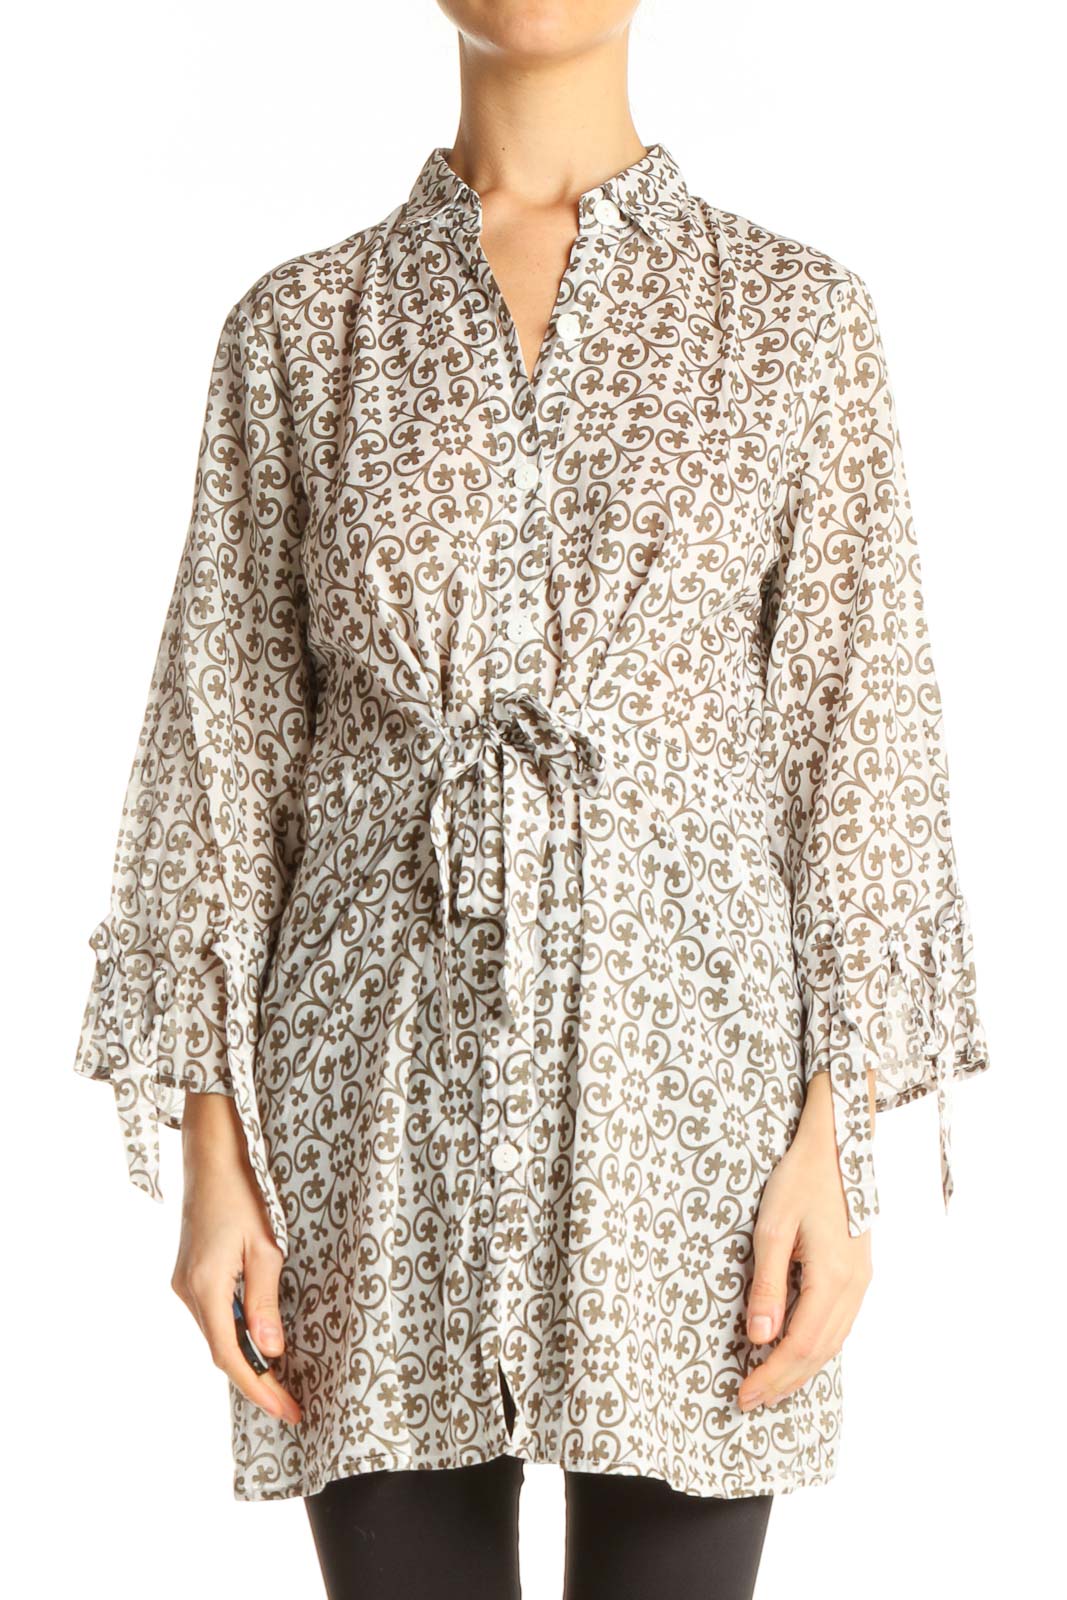 White Geometric Print All Day Wear Shirt Front